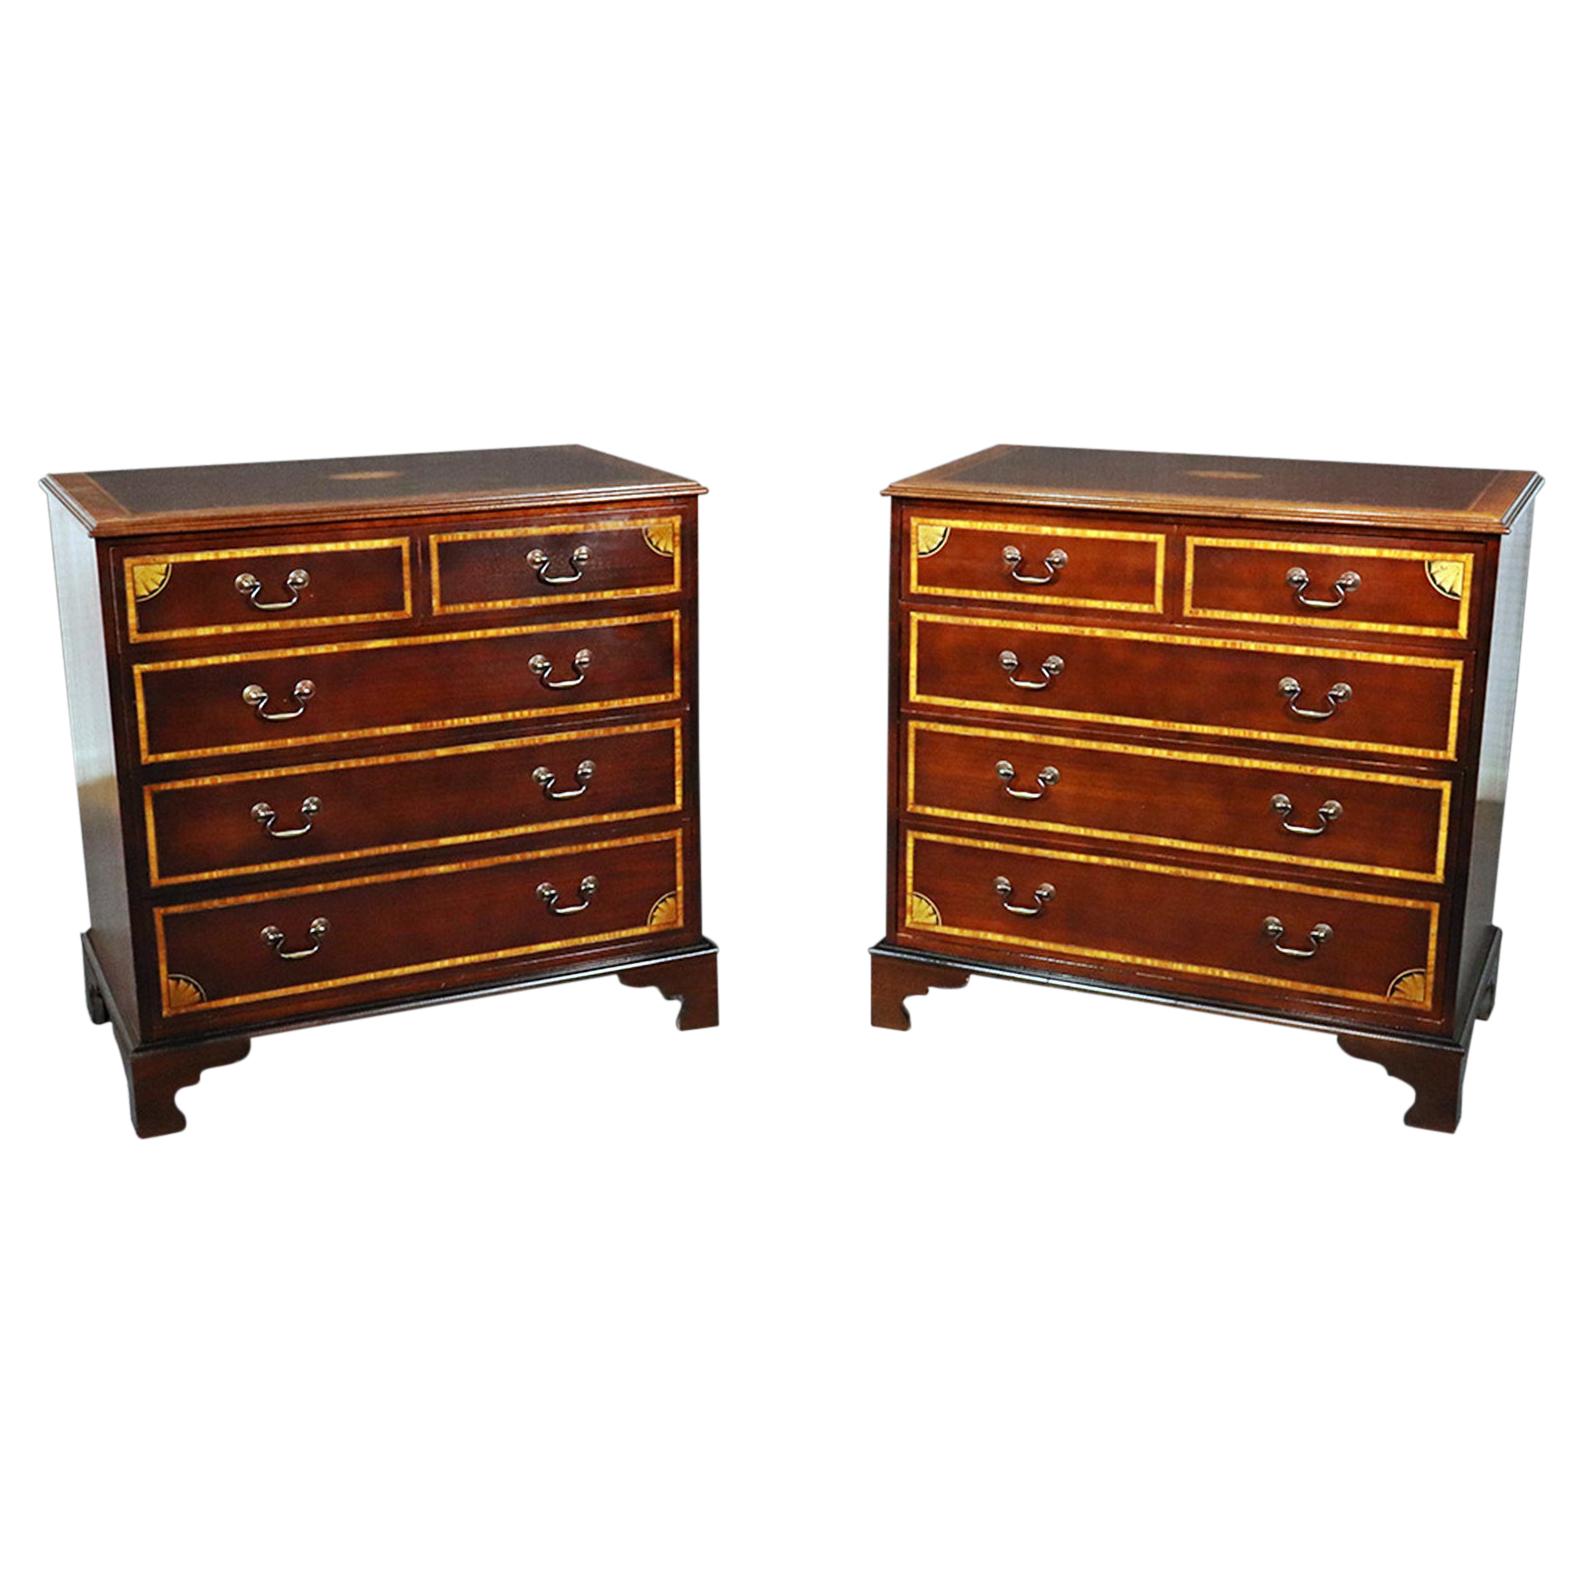 Pair of Georgian Style Inlaid Mahogany Commodes Dressers